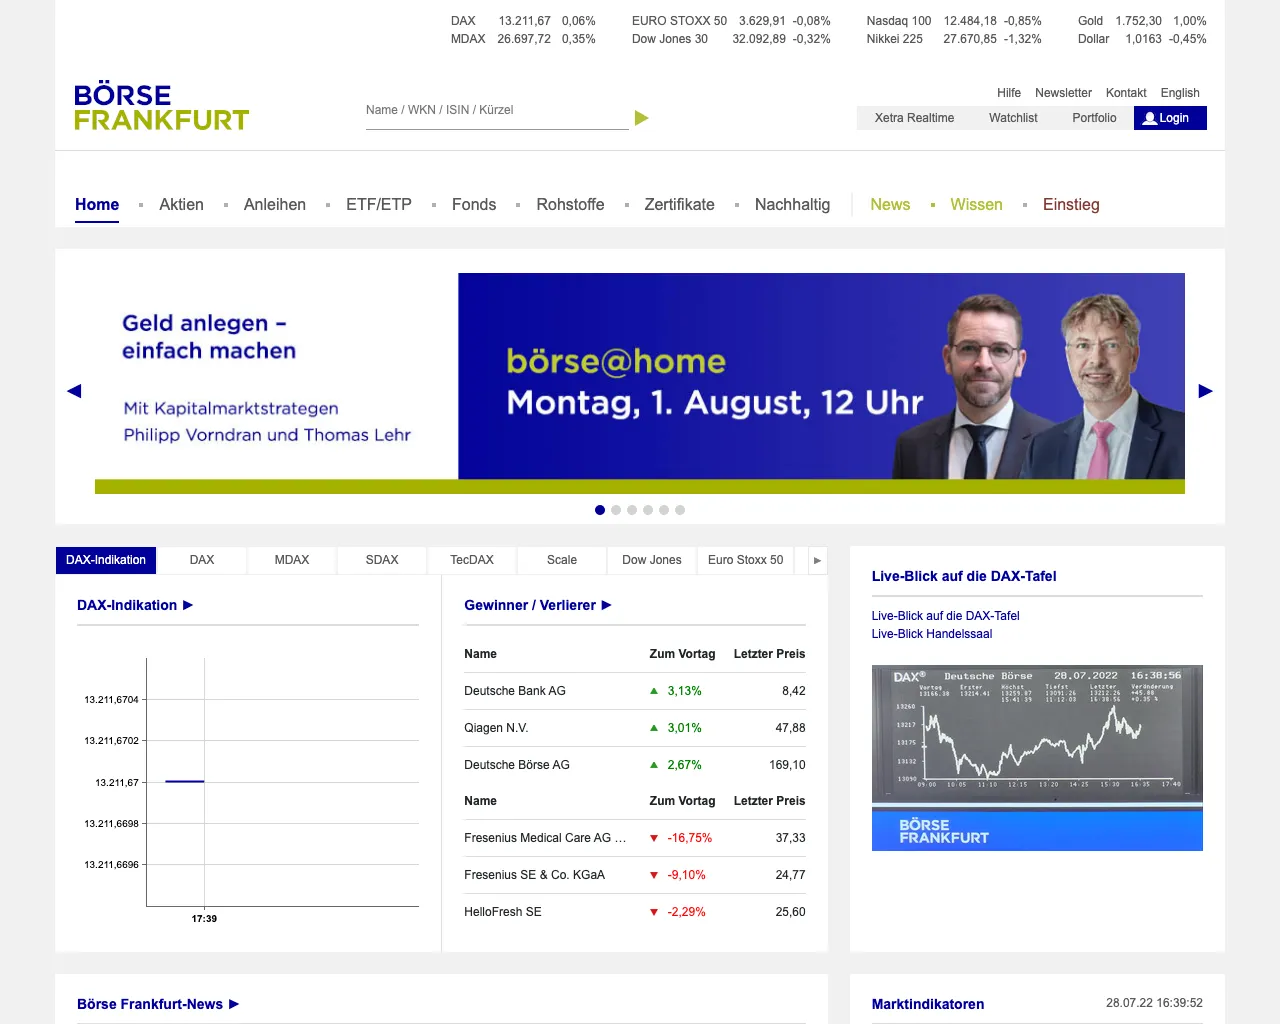 The Börse Frankfurt site without the cookie banner